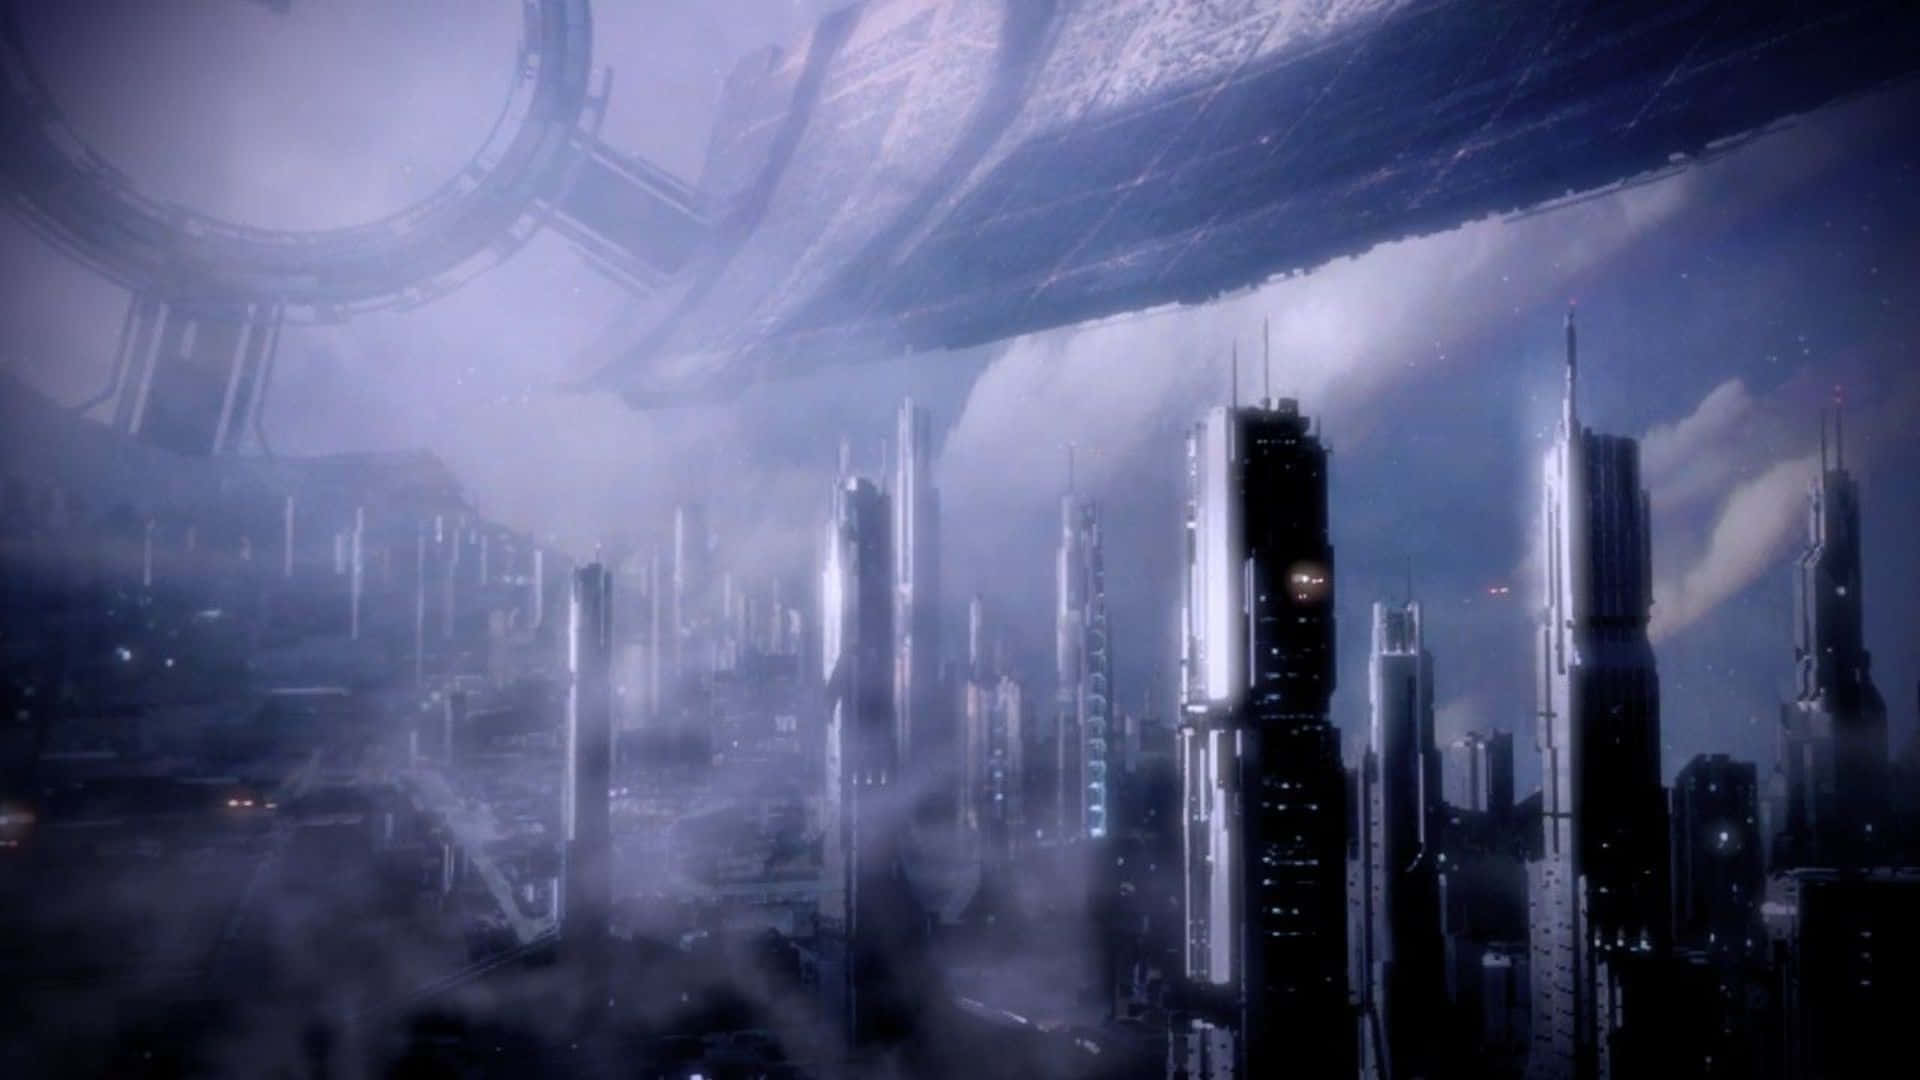 Stunning view of the Mass Effect Citadel in high resolution Wallpaper